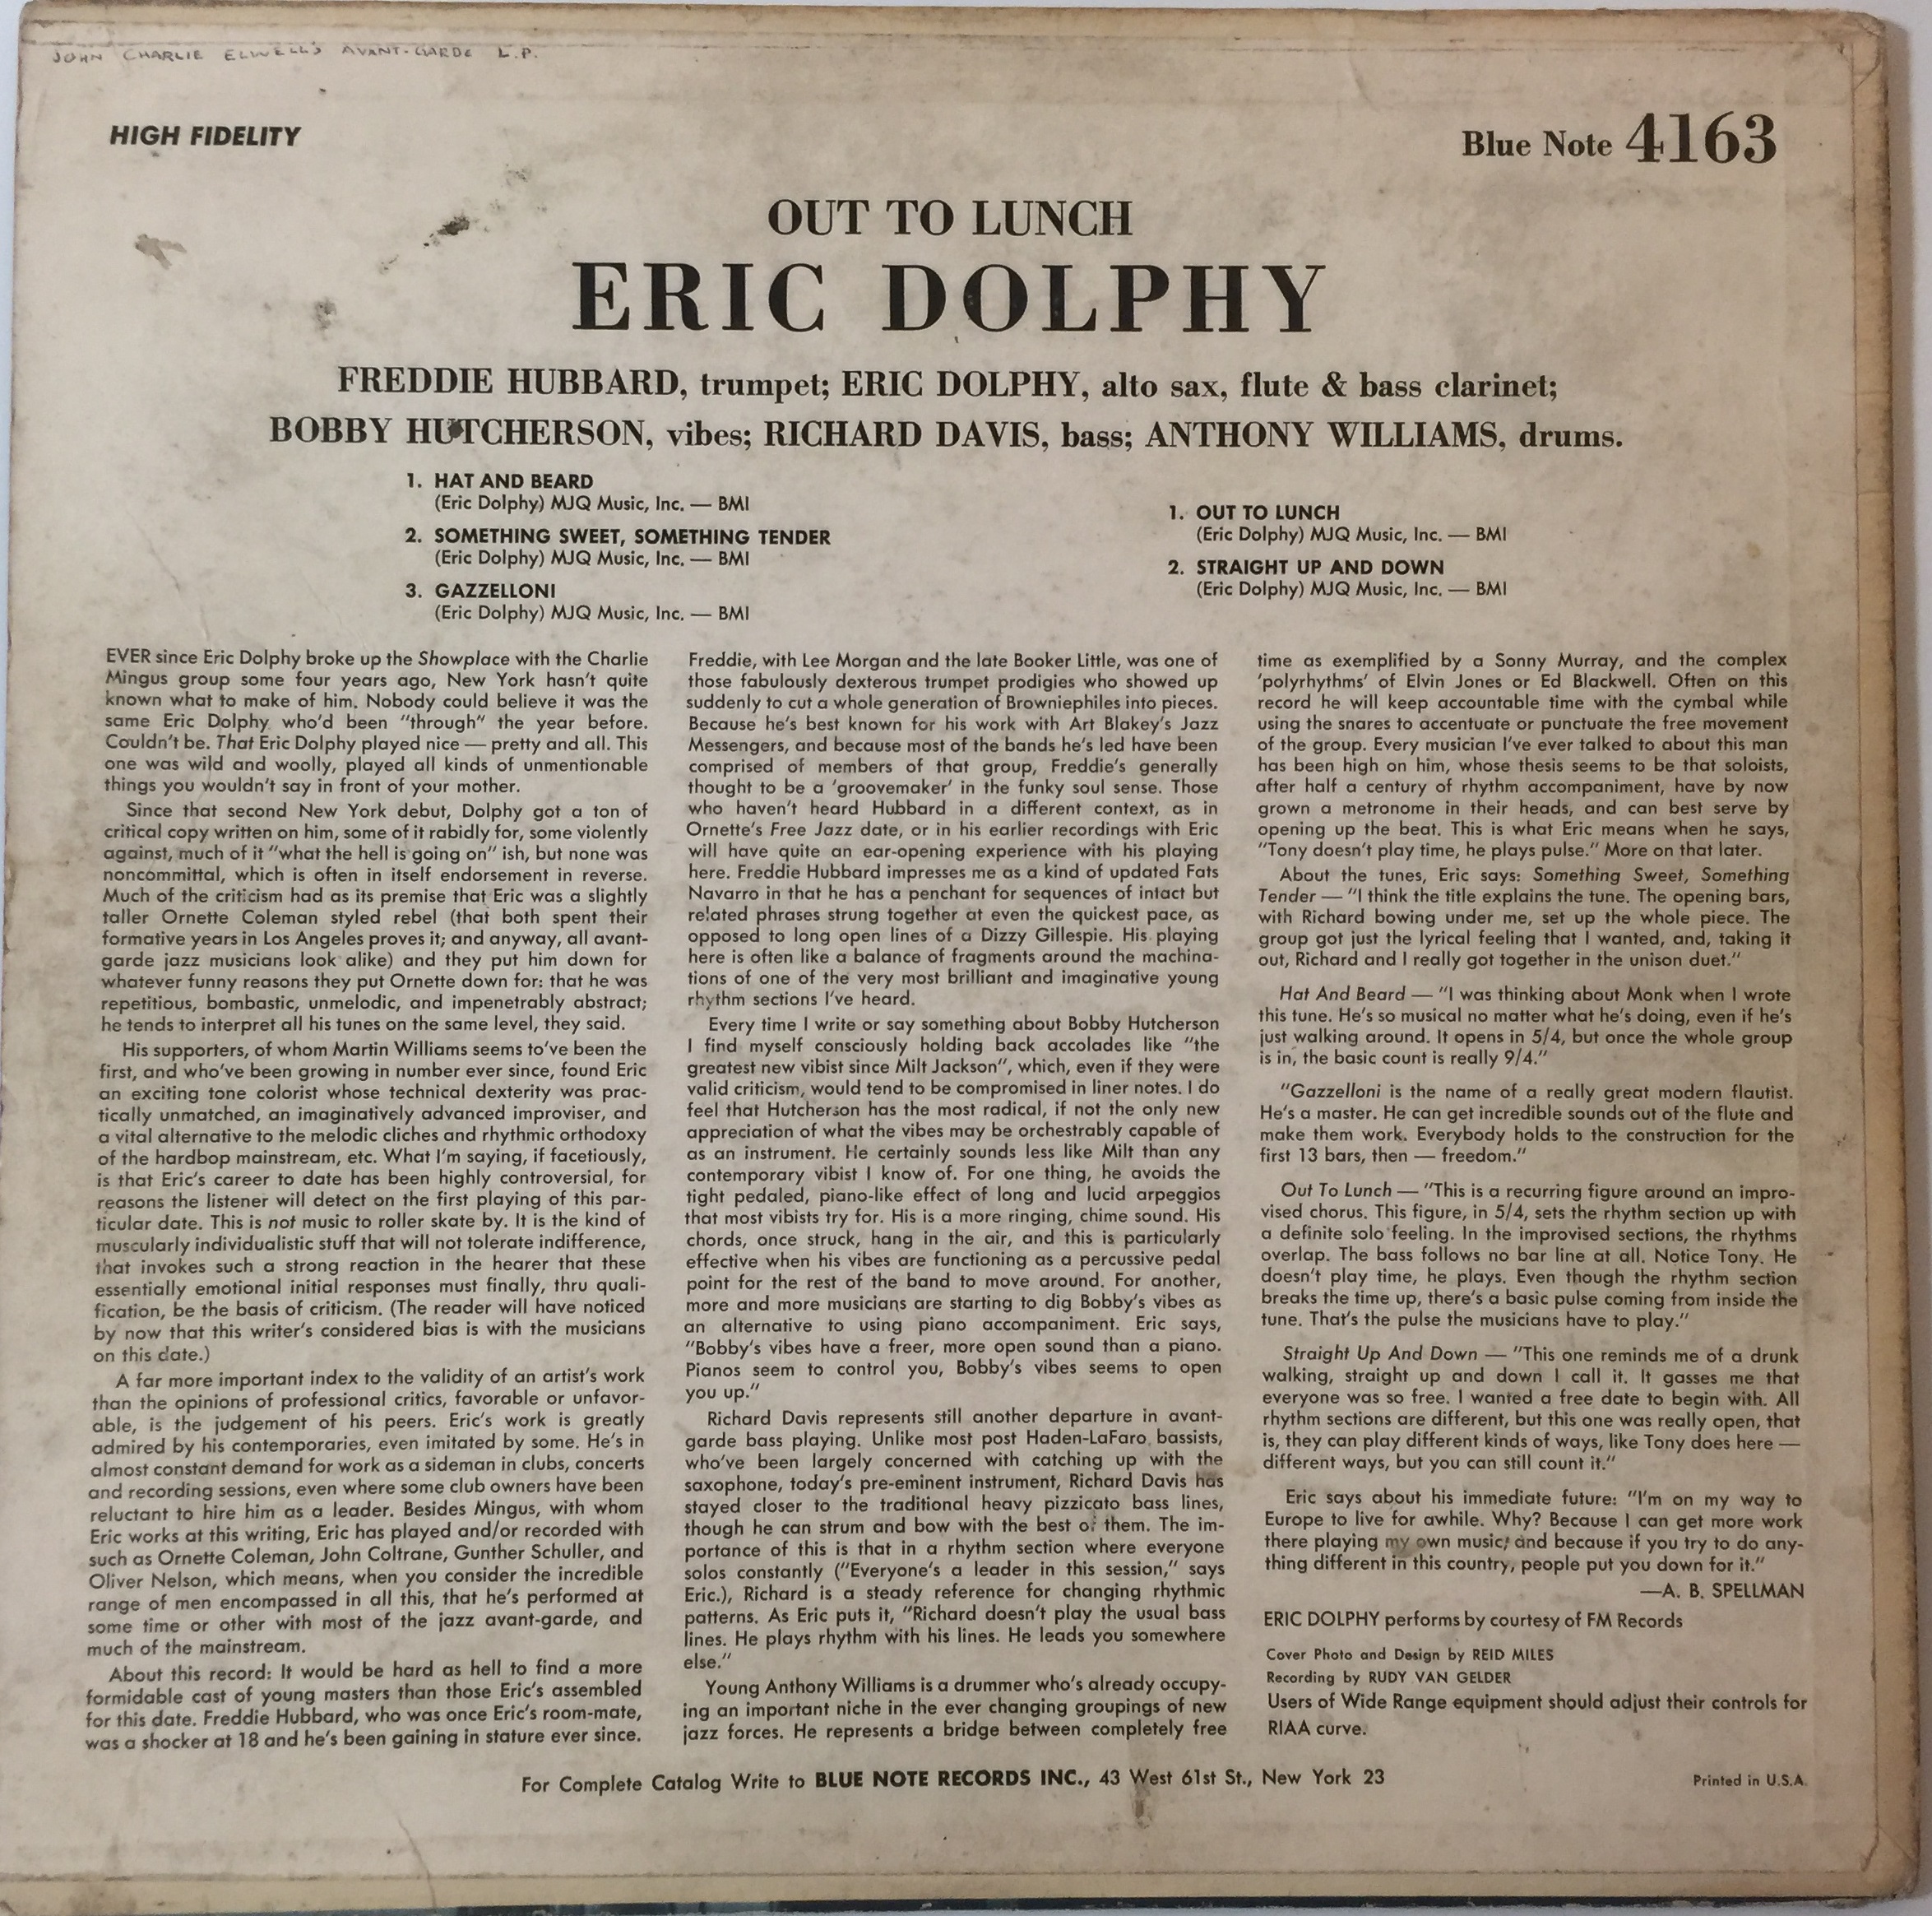 ERIC DOLPHY - OUT TO LUNCH! LP (US ORIGINAL BLUE NOTE - BLP 4163). - Image 2 of 4